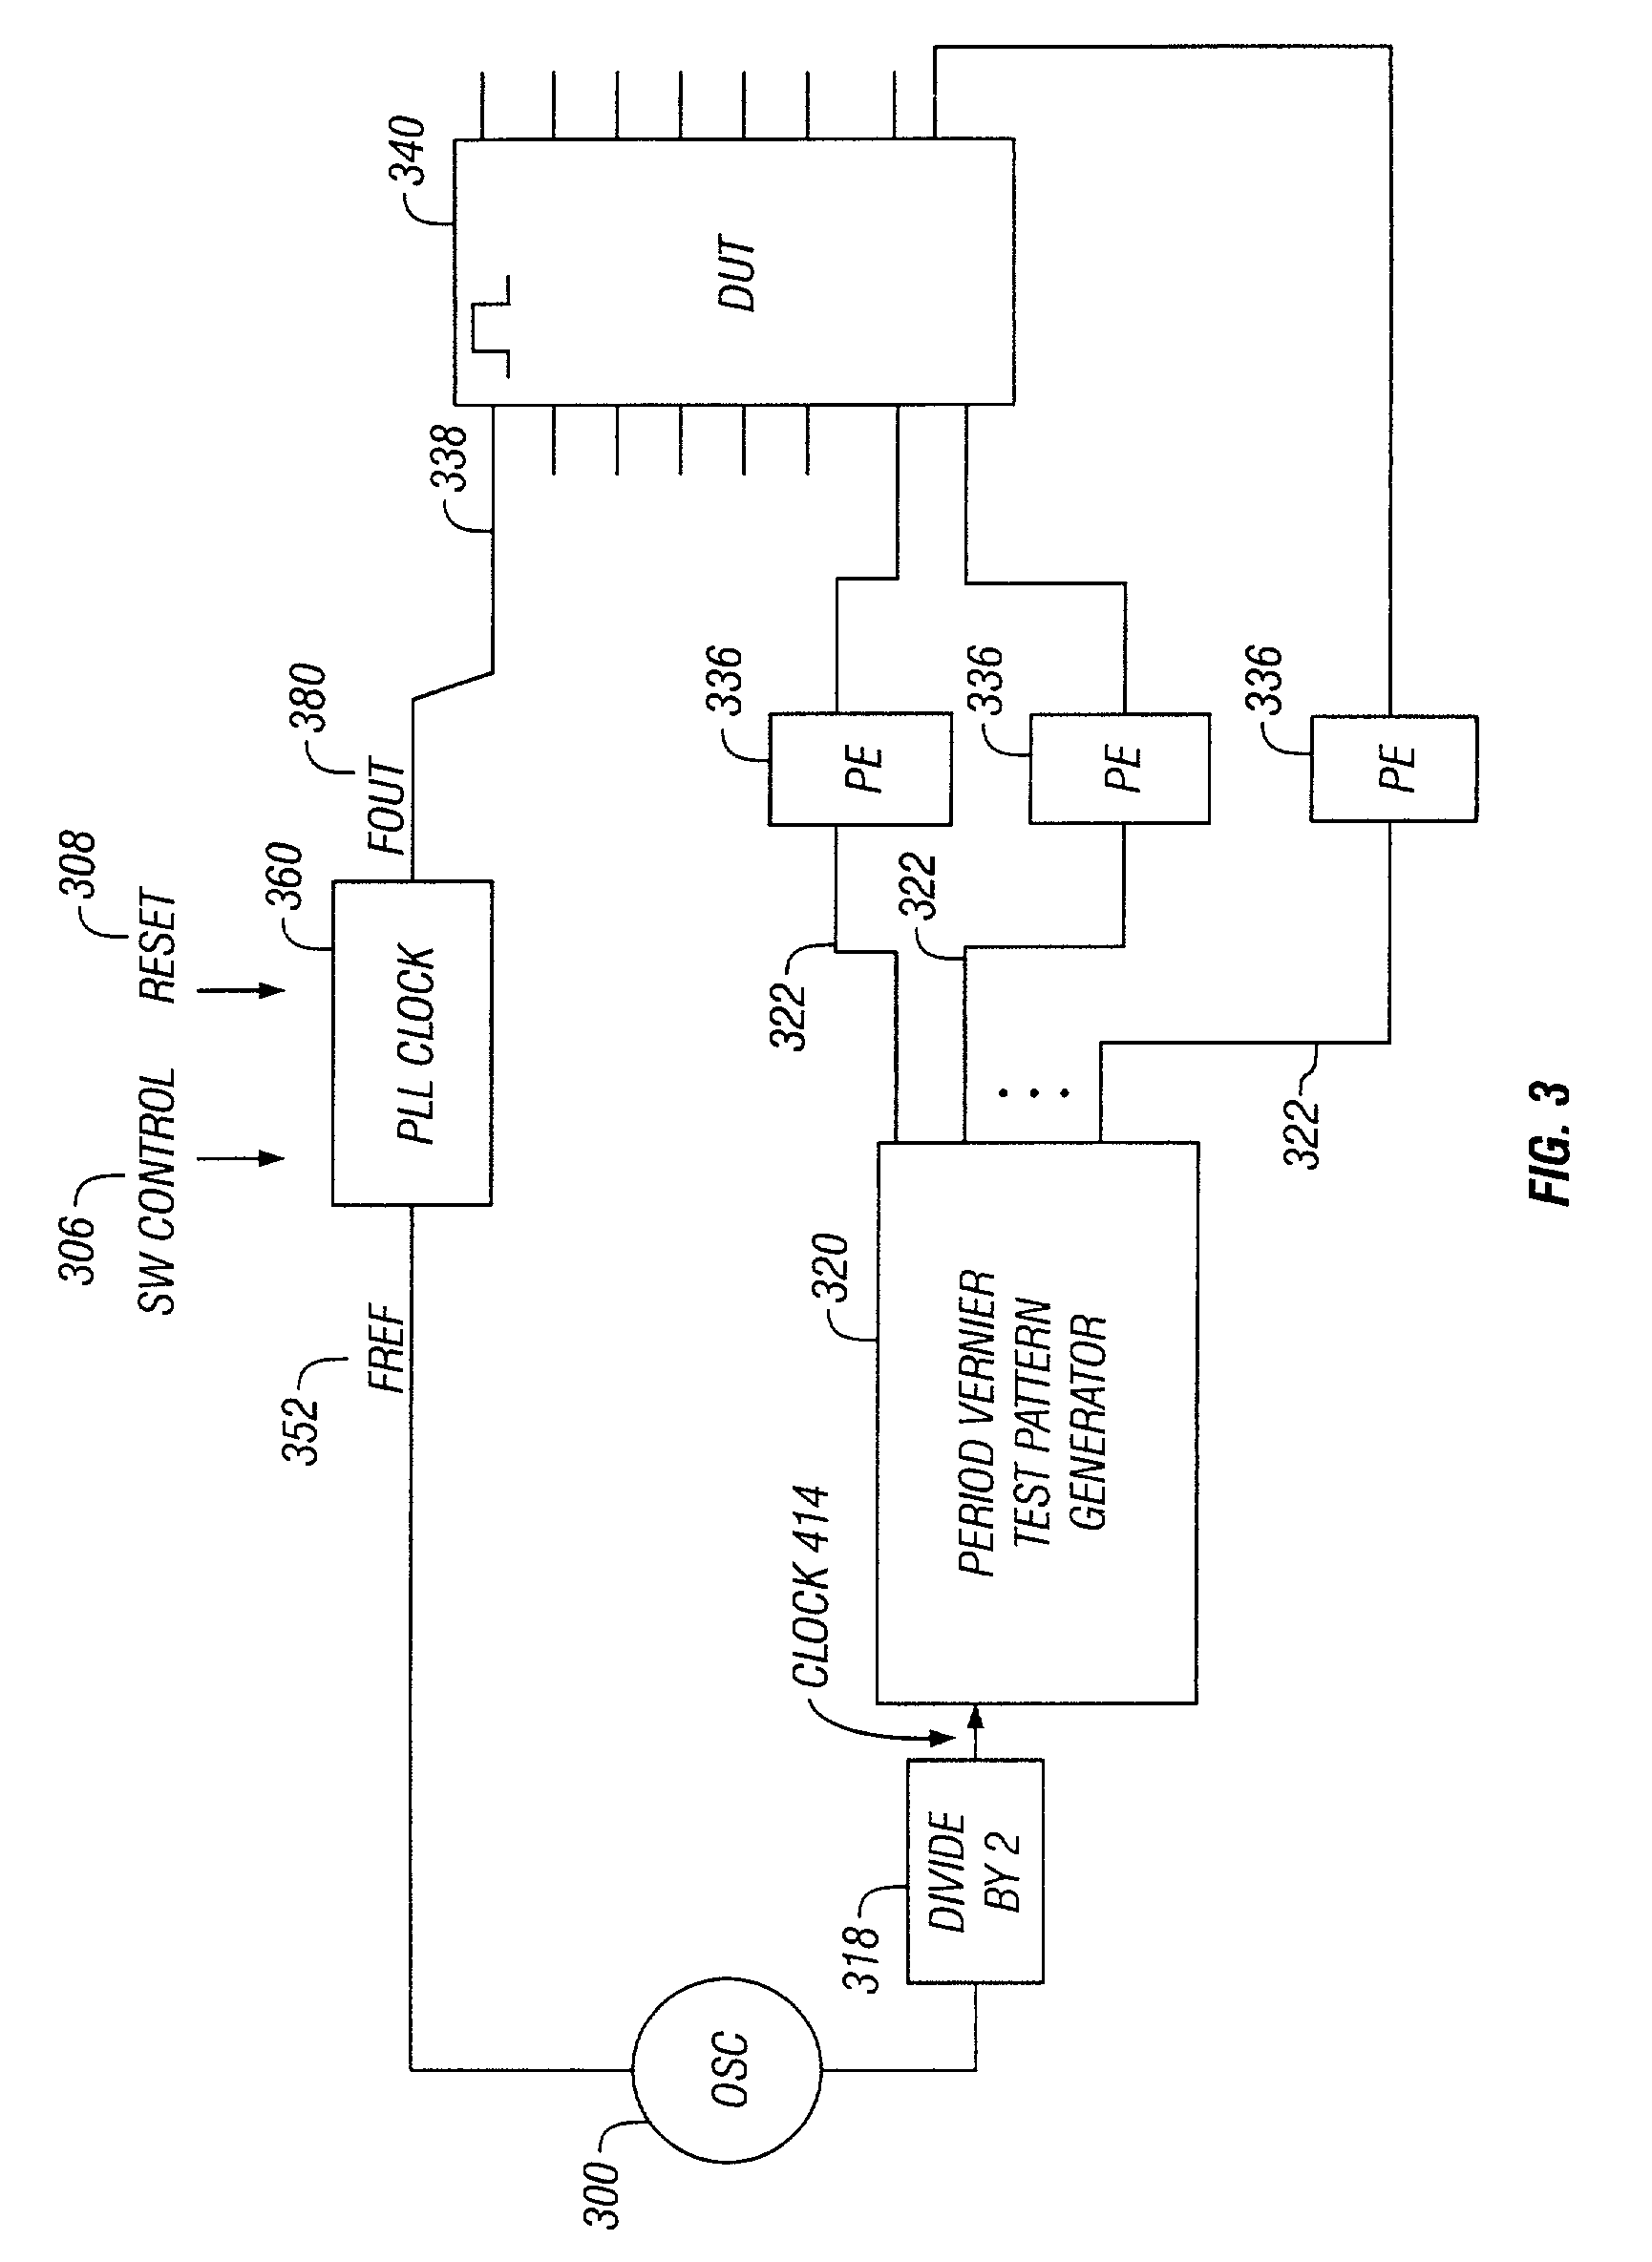 Low-jitter clock for test system